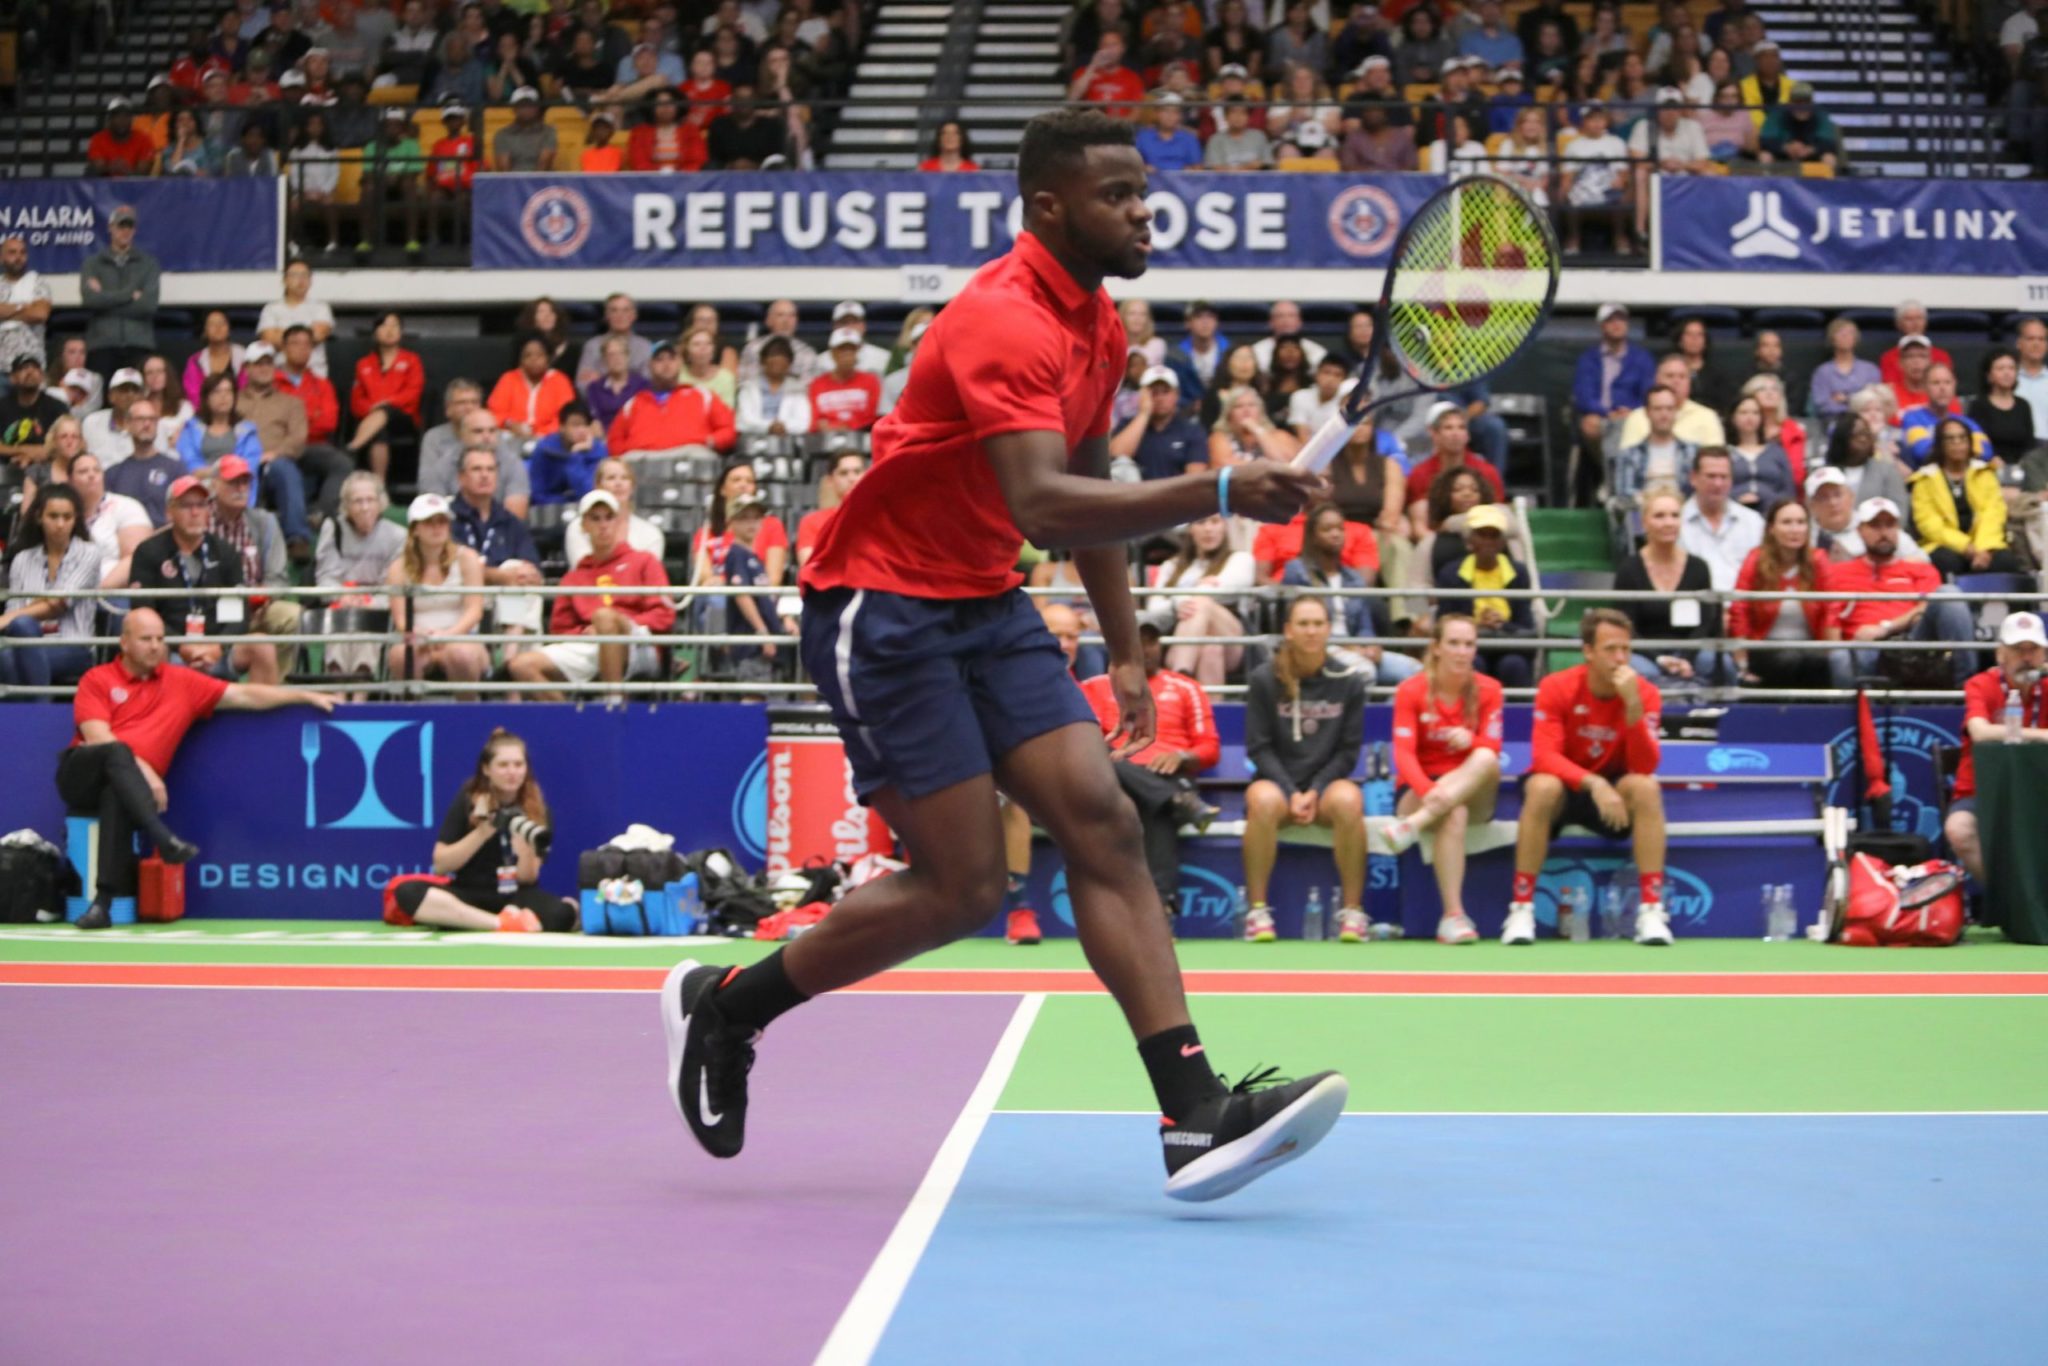 DC's pro tennis team, the Washington Kastles, are playing the opening game of the season at their new stadium in Union Market. Photograph by Kevin Koski.